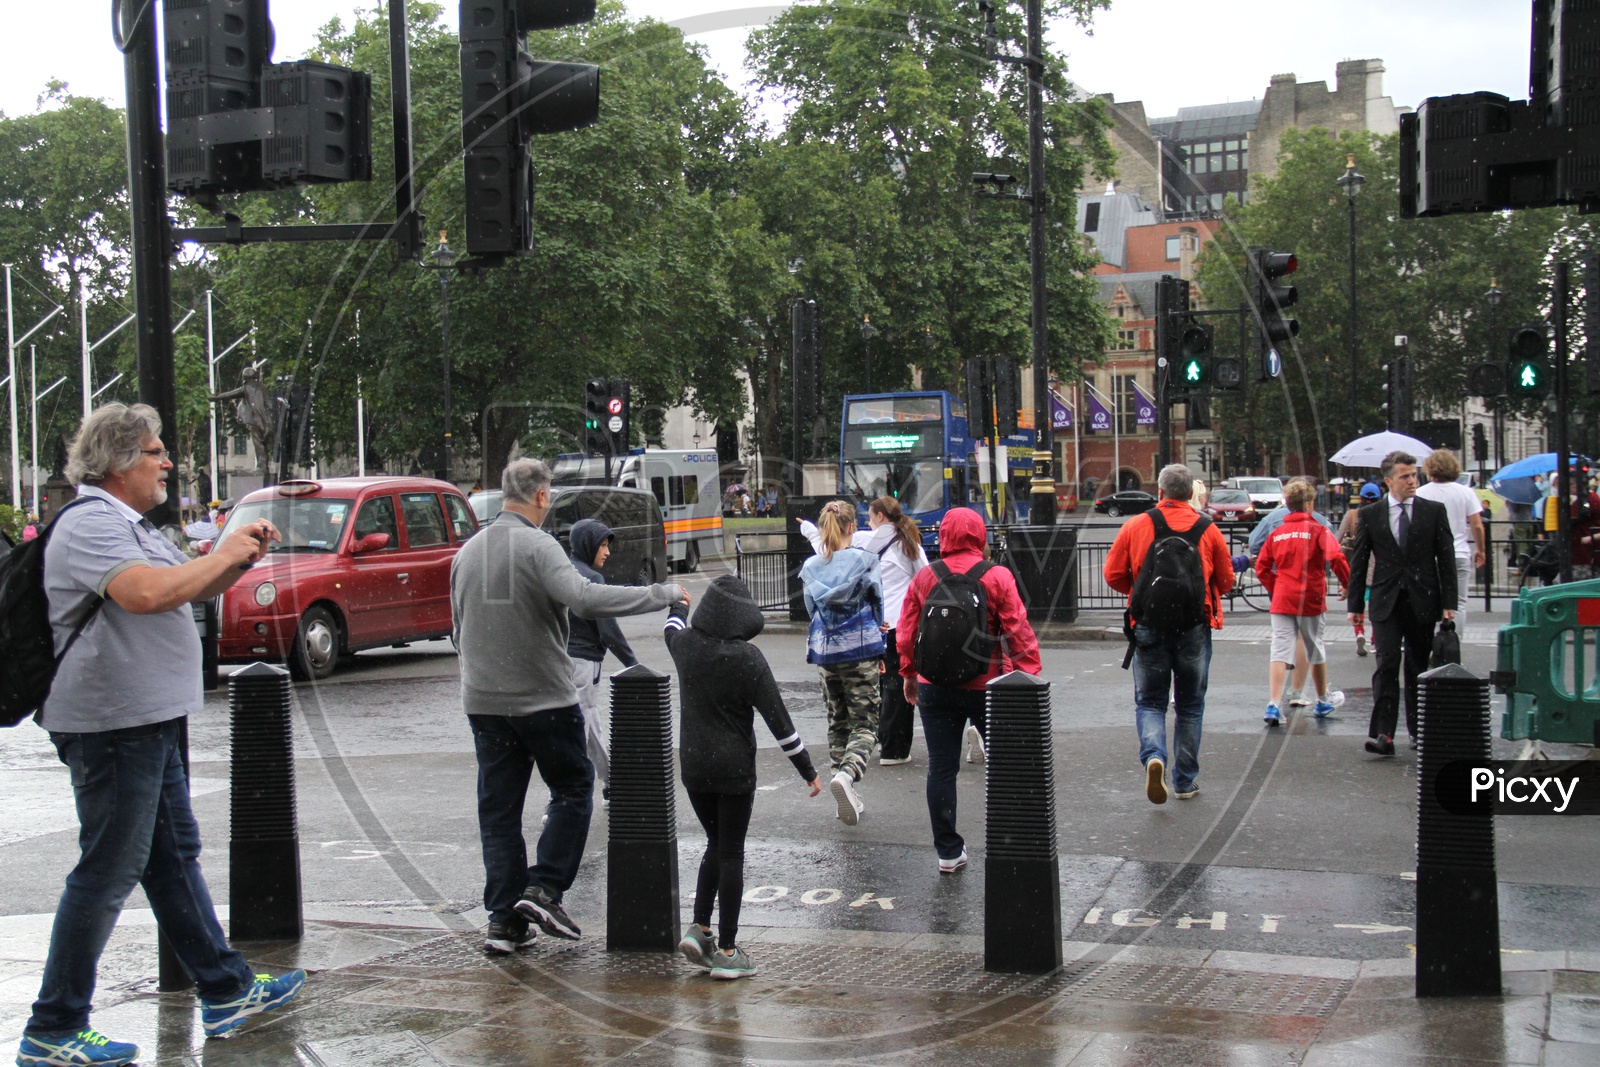 Pedestrians crossing the road on green light